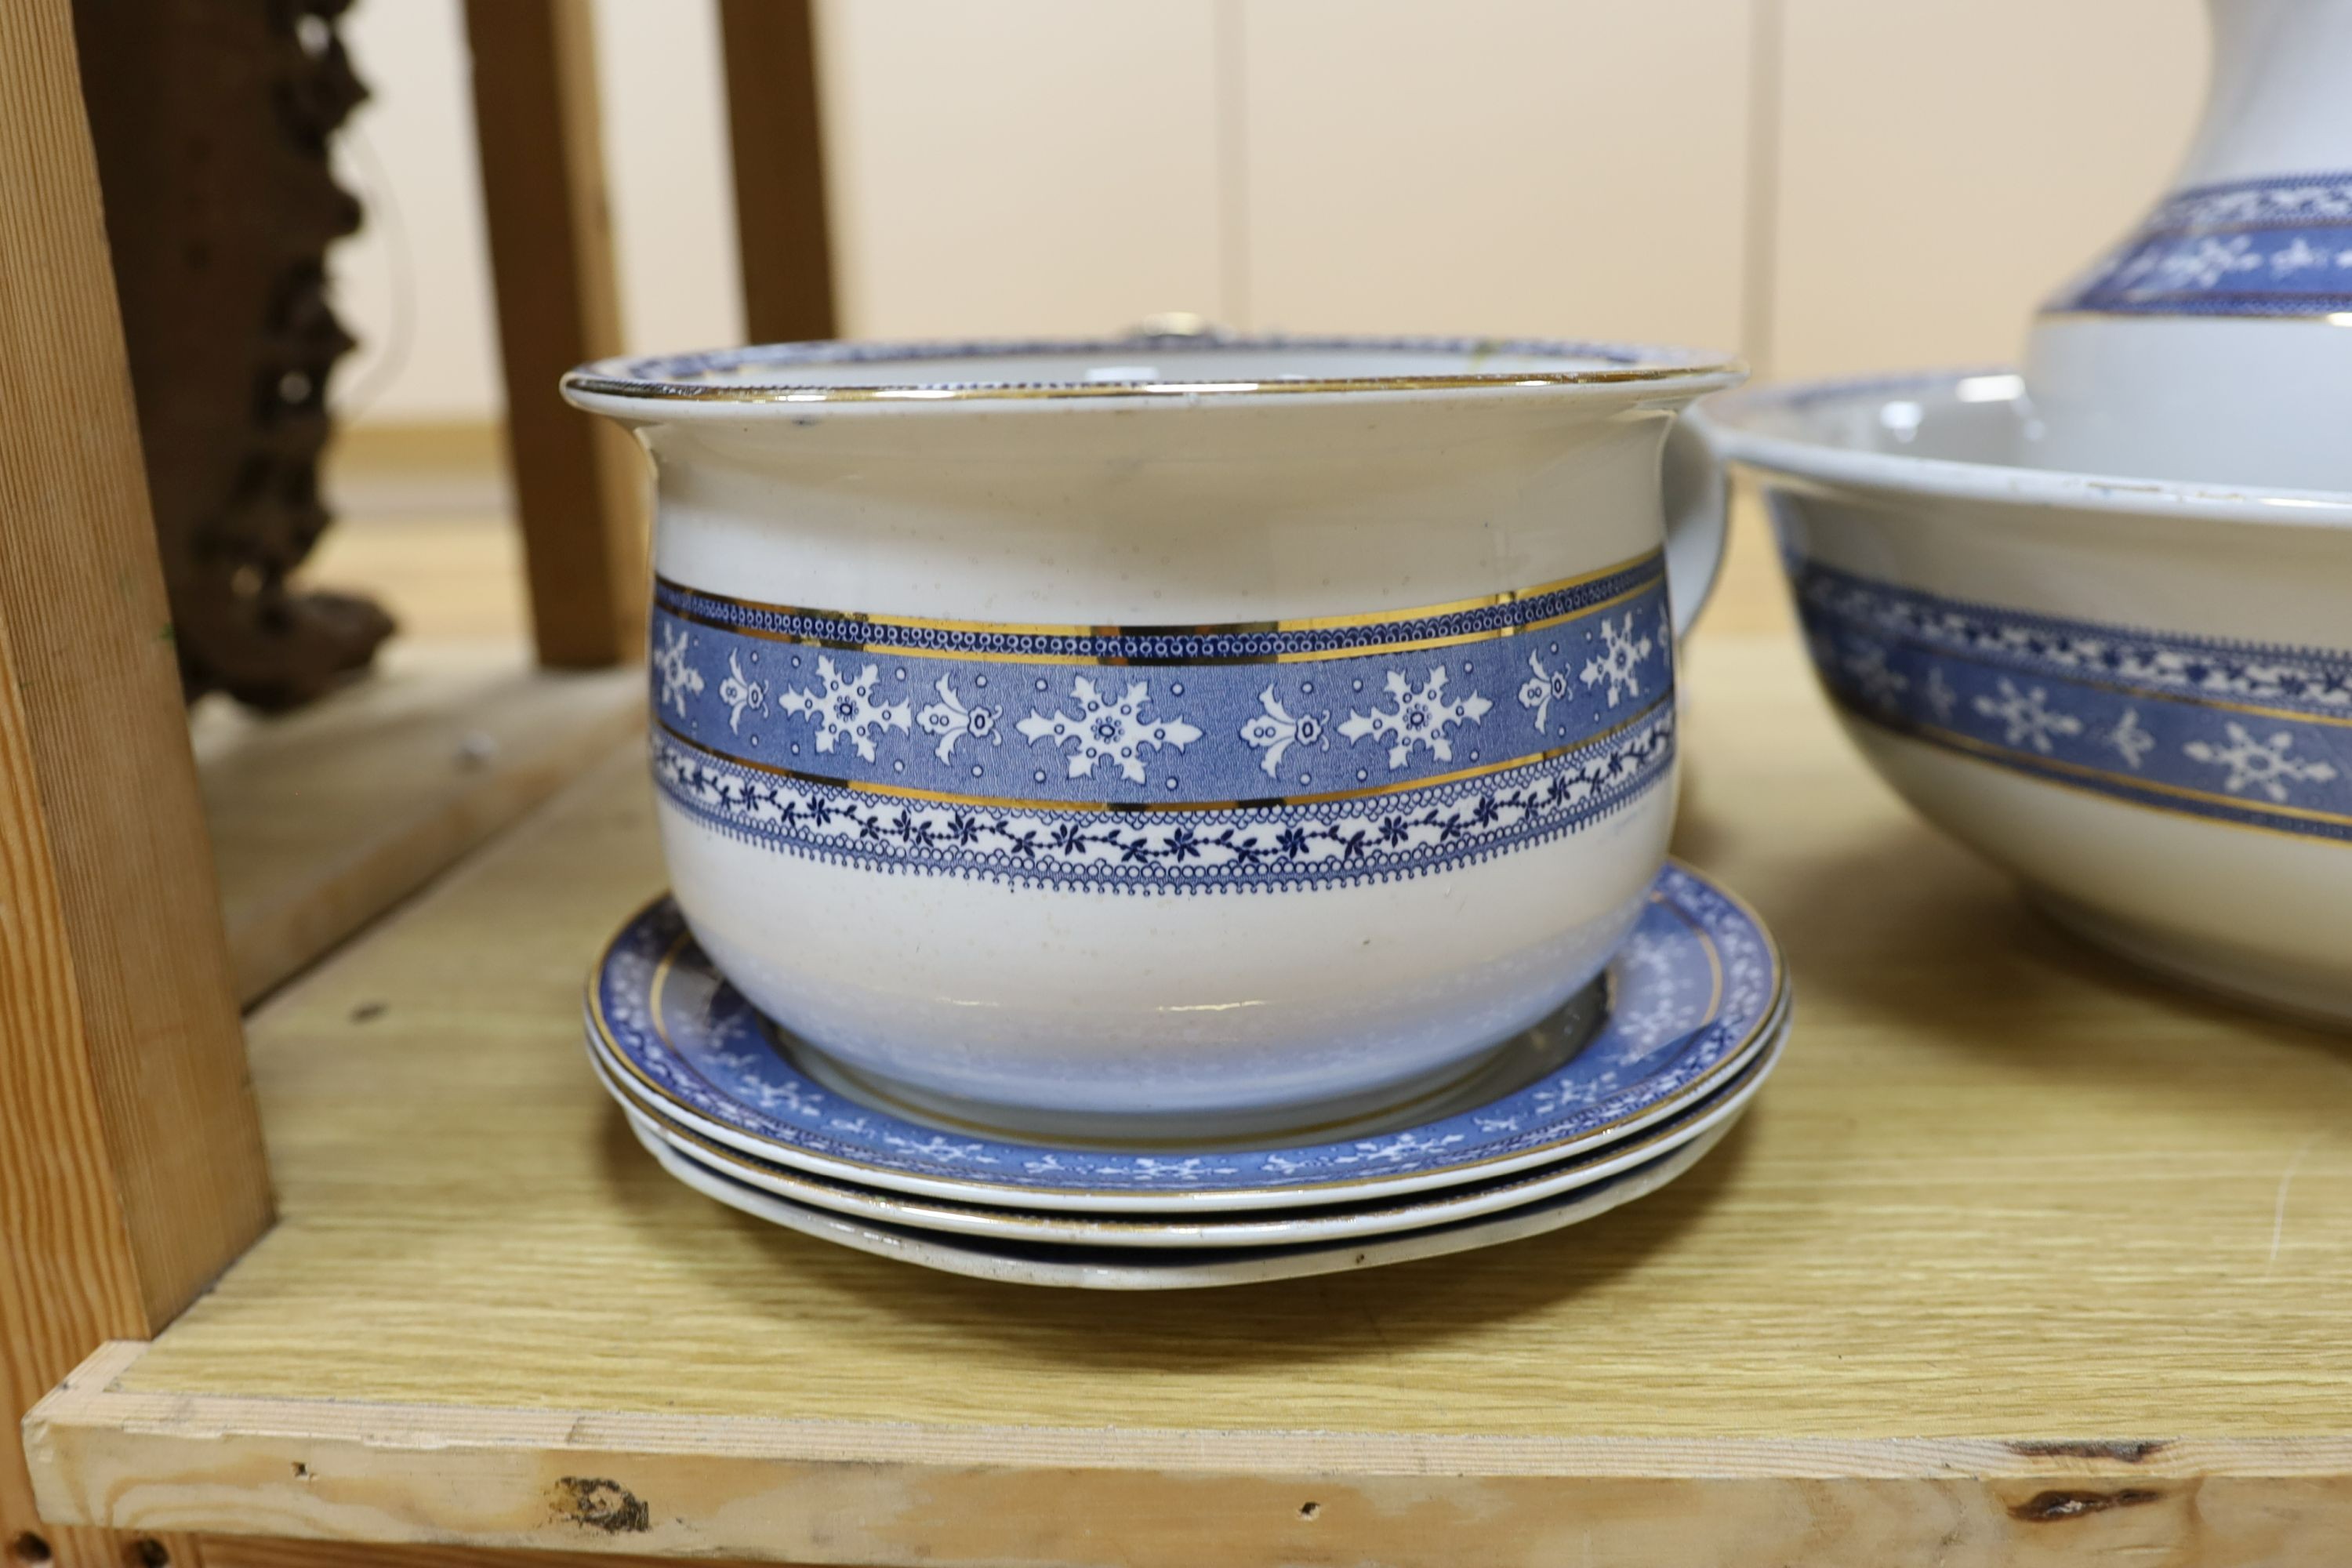 A blue and white Maltese pattern ceramic toilet set and a pearlware plate